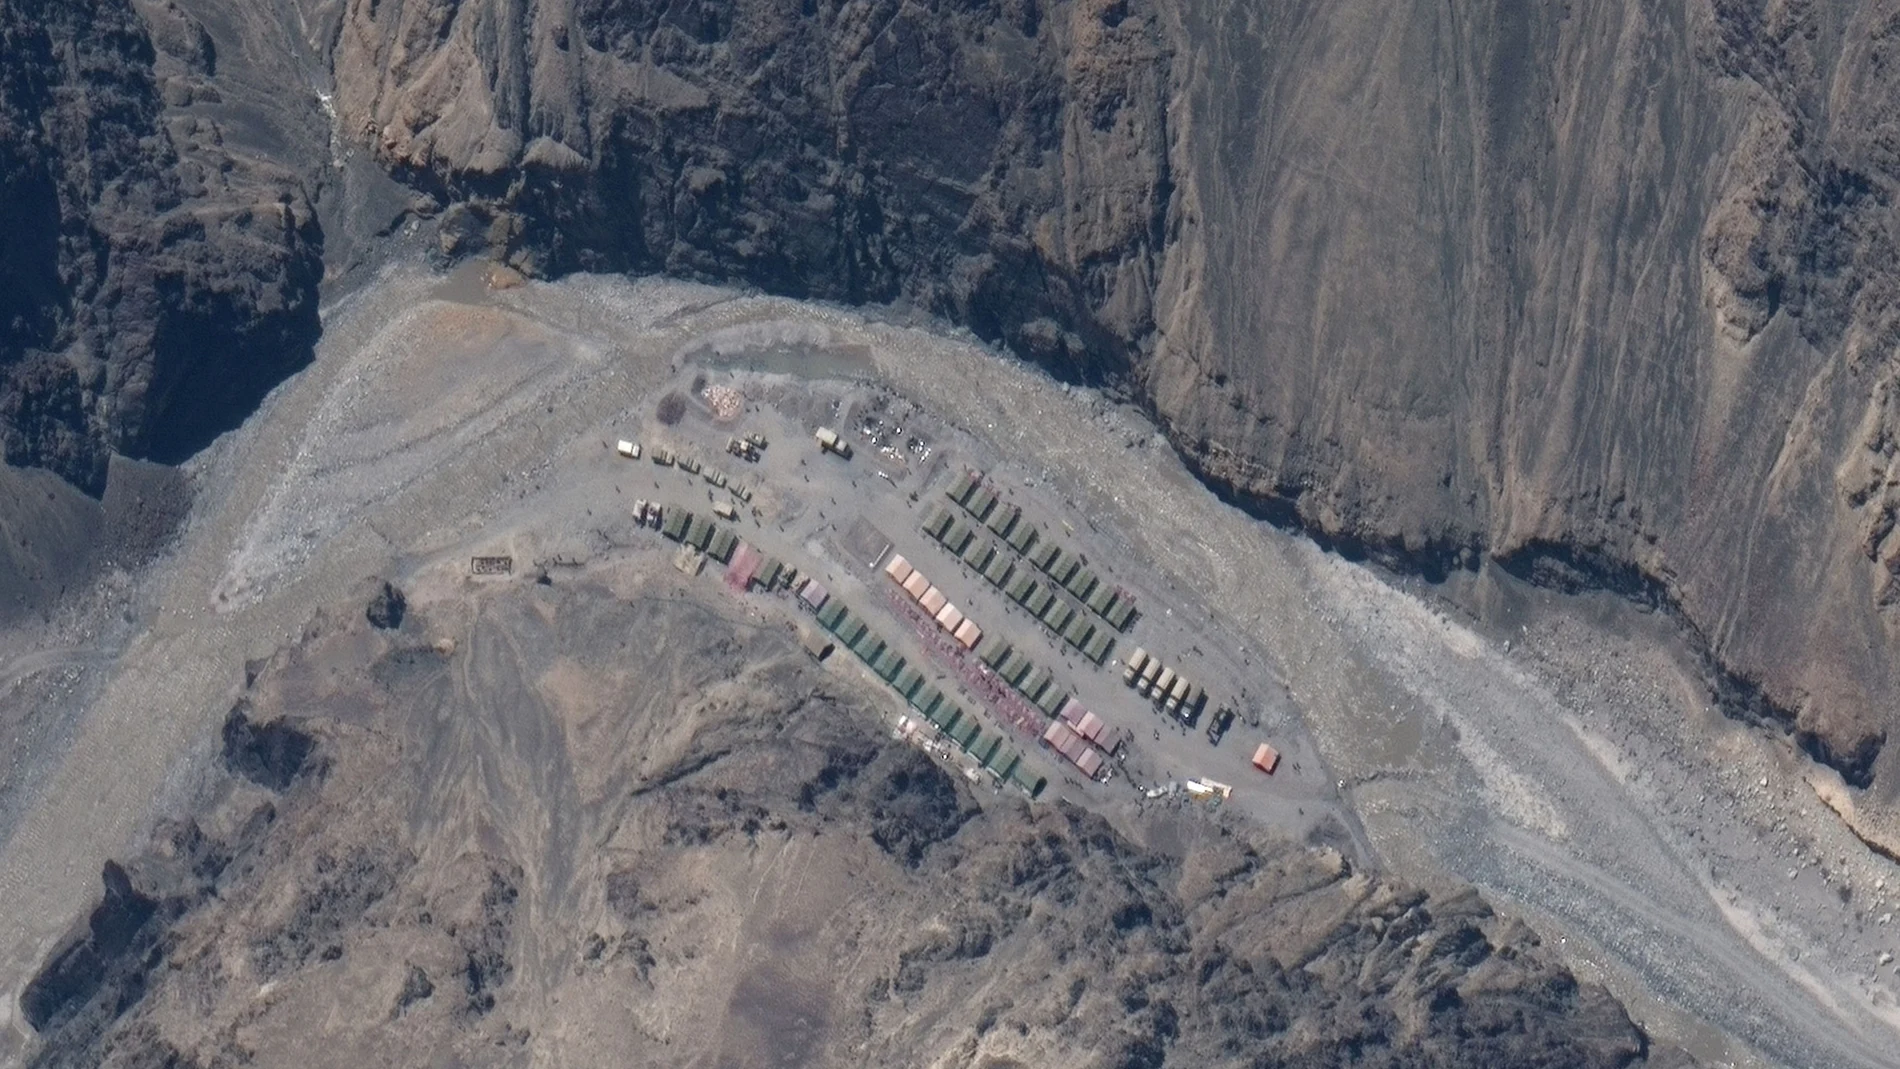 Maxar WorldView-3 satellite image shows the PLA (China's People's Liberation Army) Base in Galwan Valley